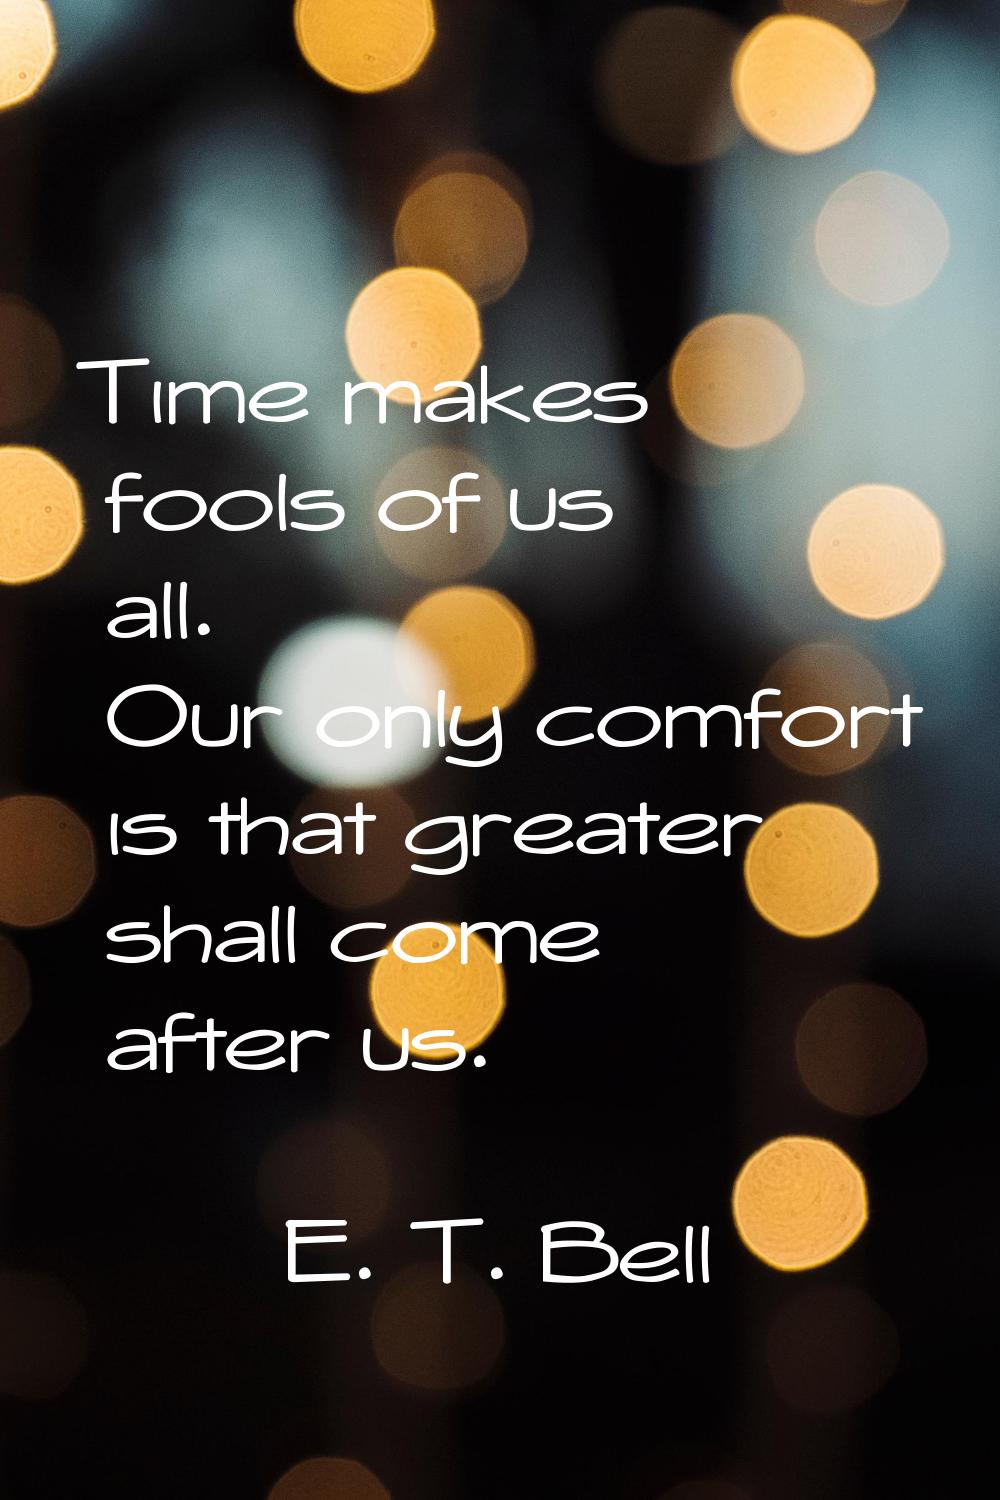 Time makes fools of us all. Our only comfort is that greater shall come after us.